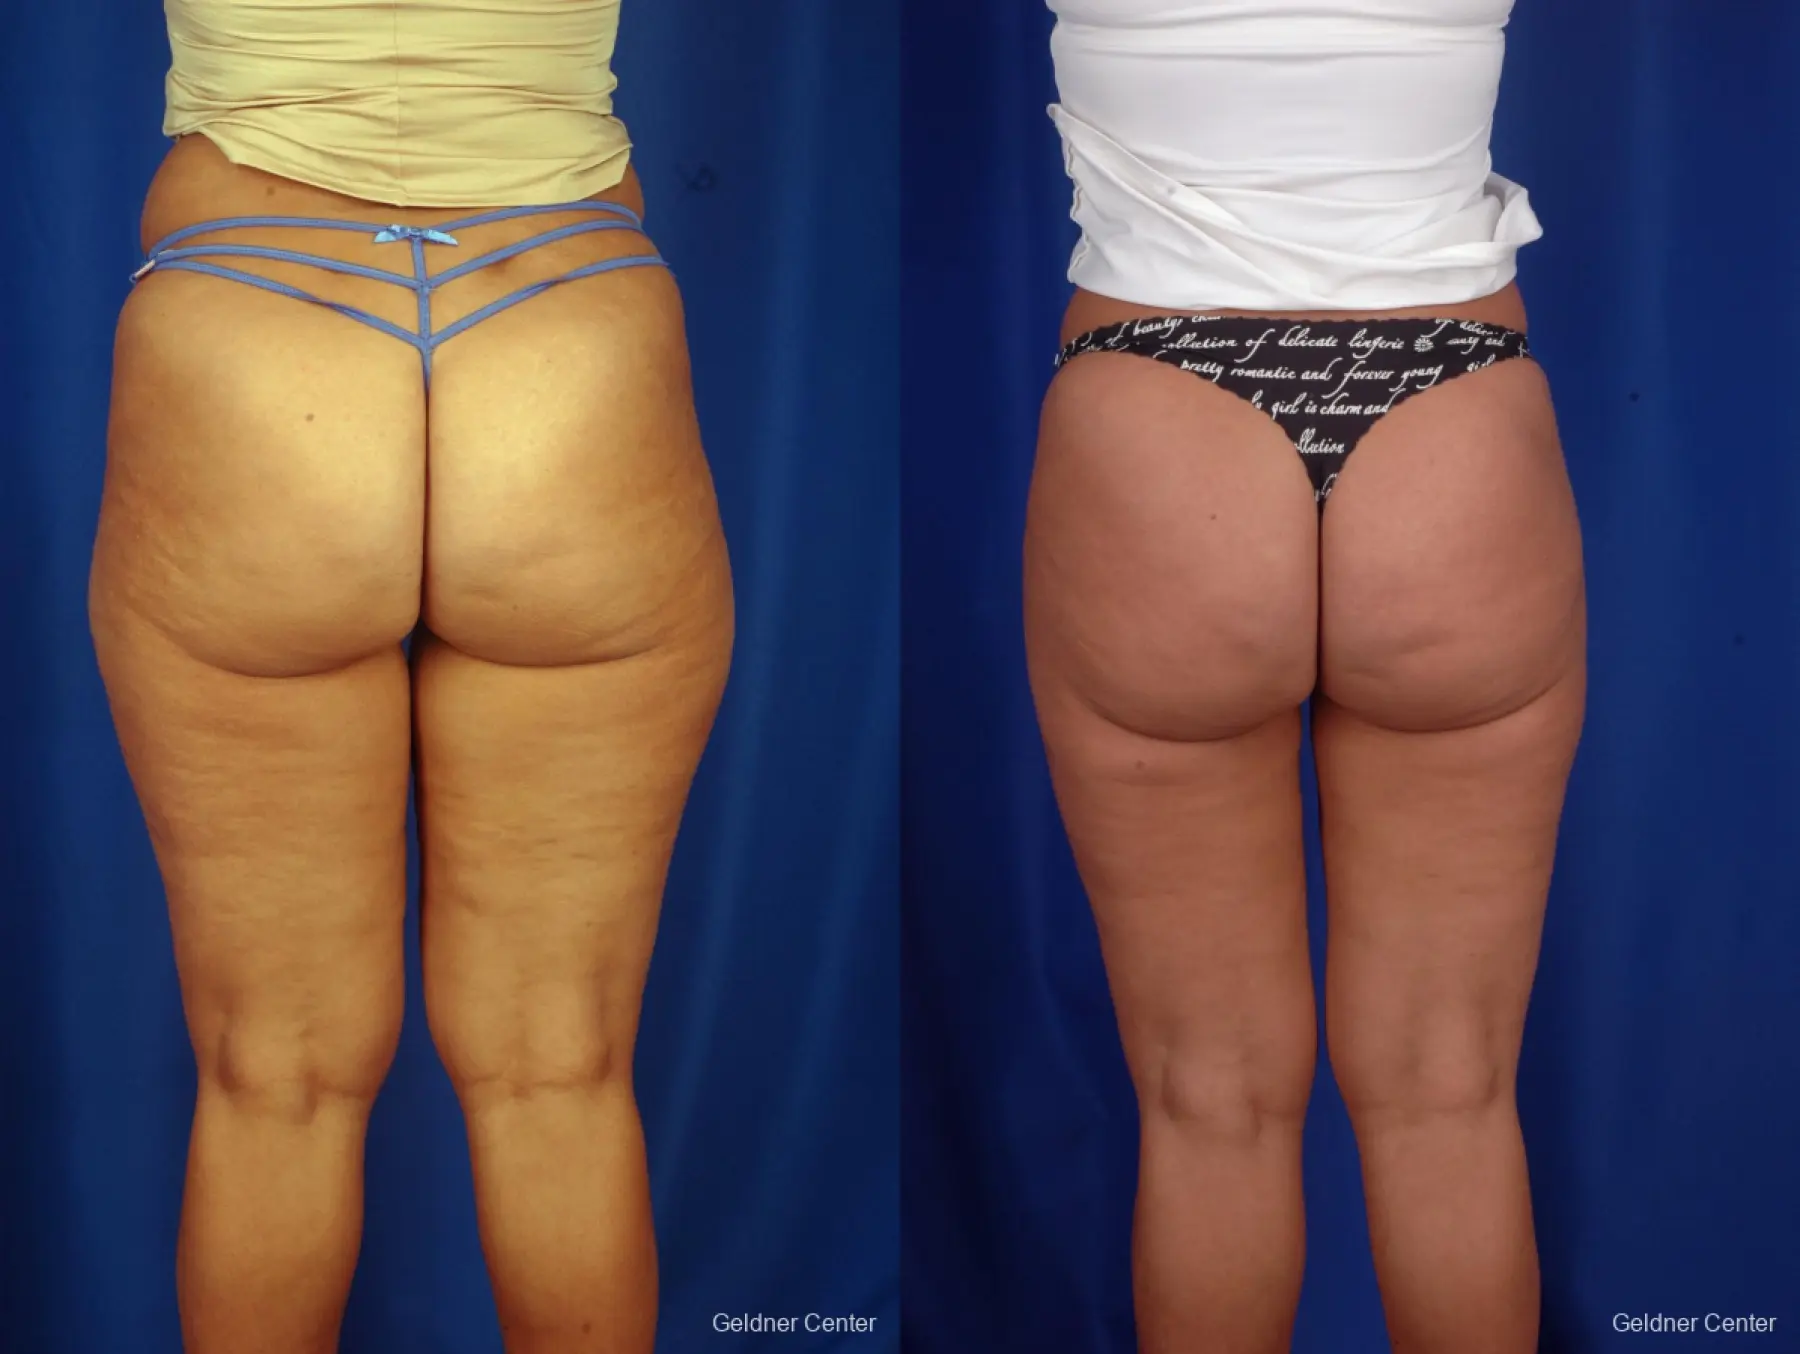 Liposuction: Patient 7 - Before and After 4